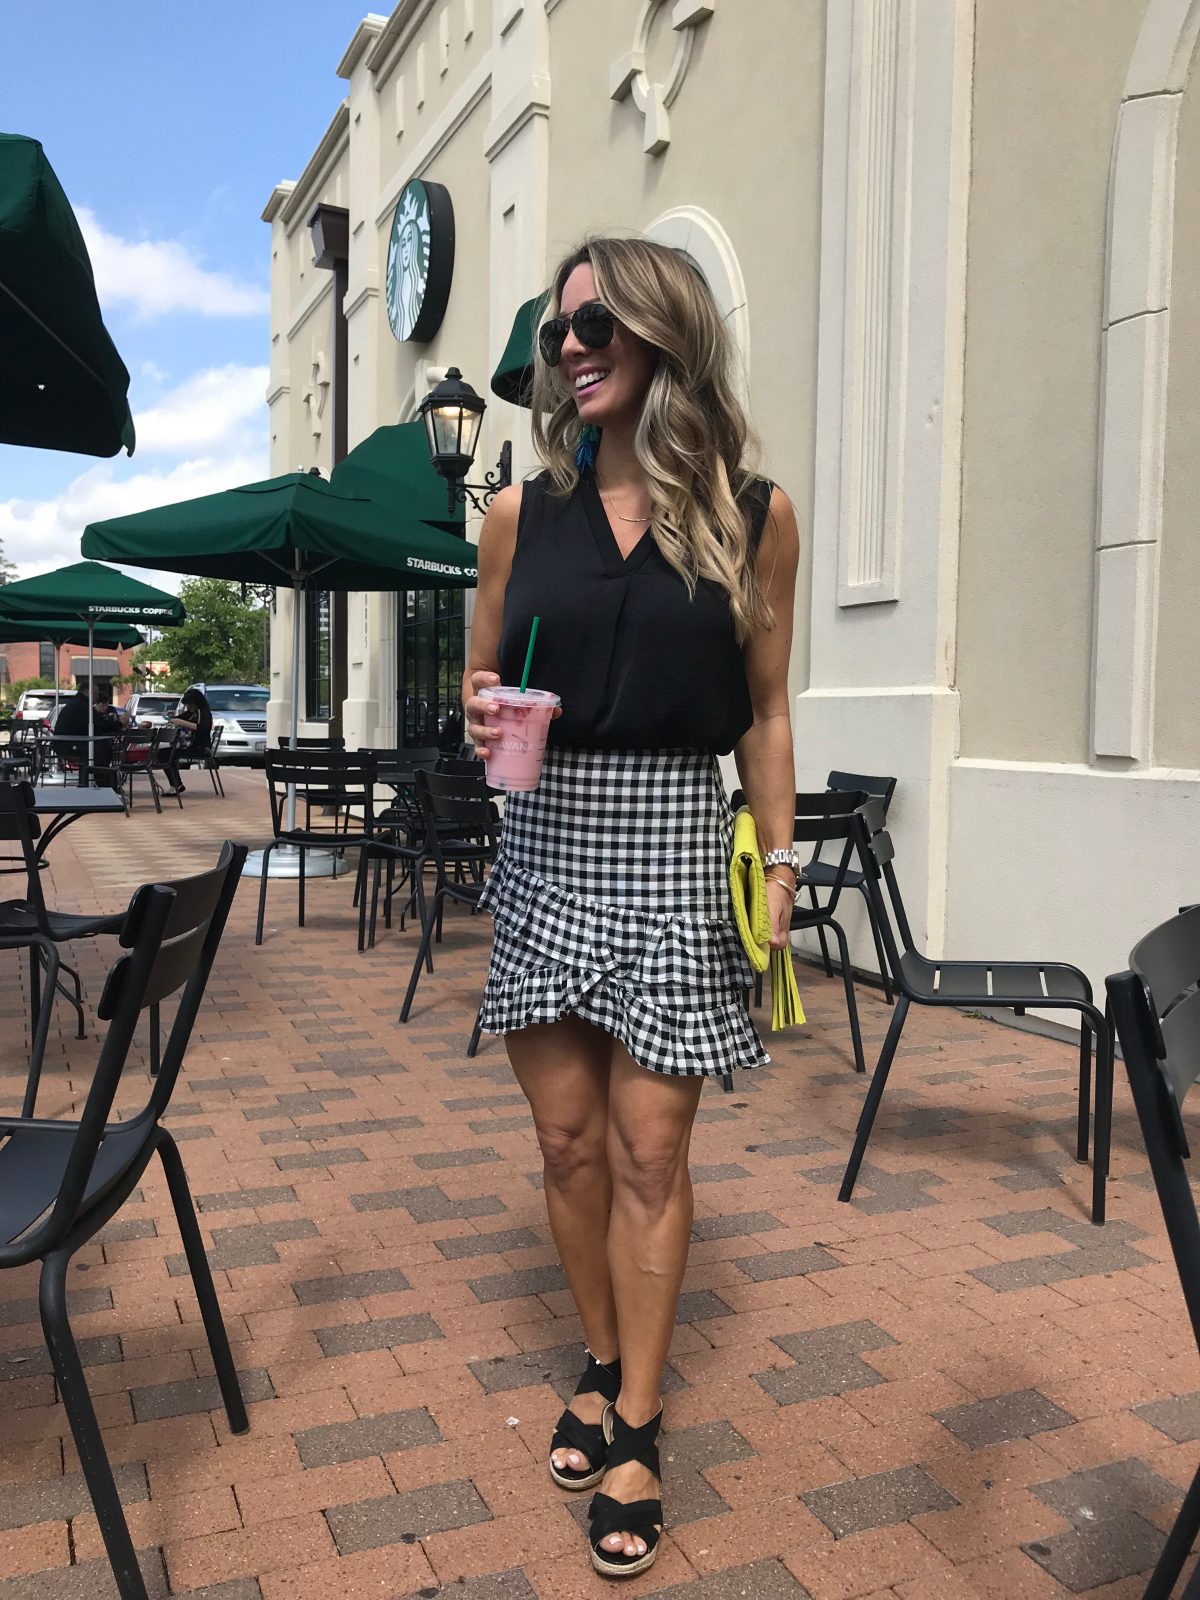 Gingham skirt and black camisole with wedges